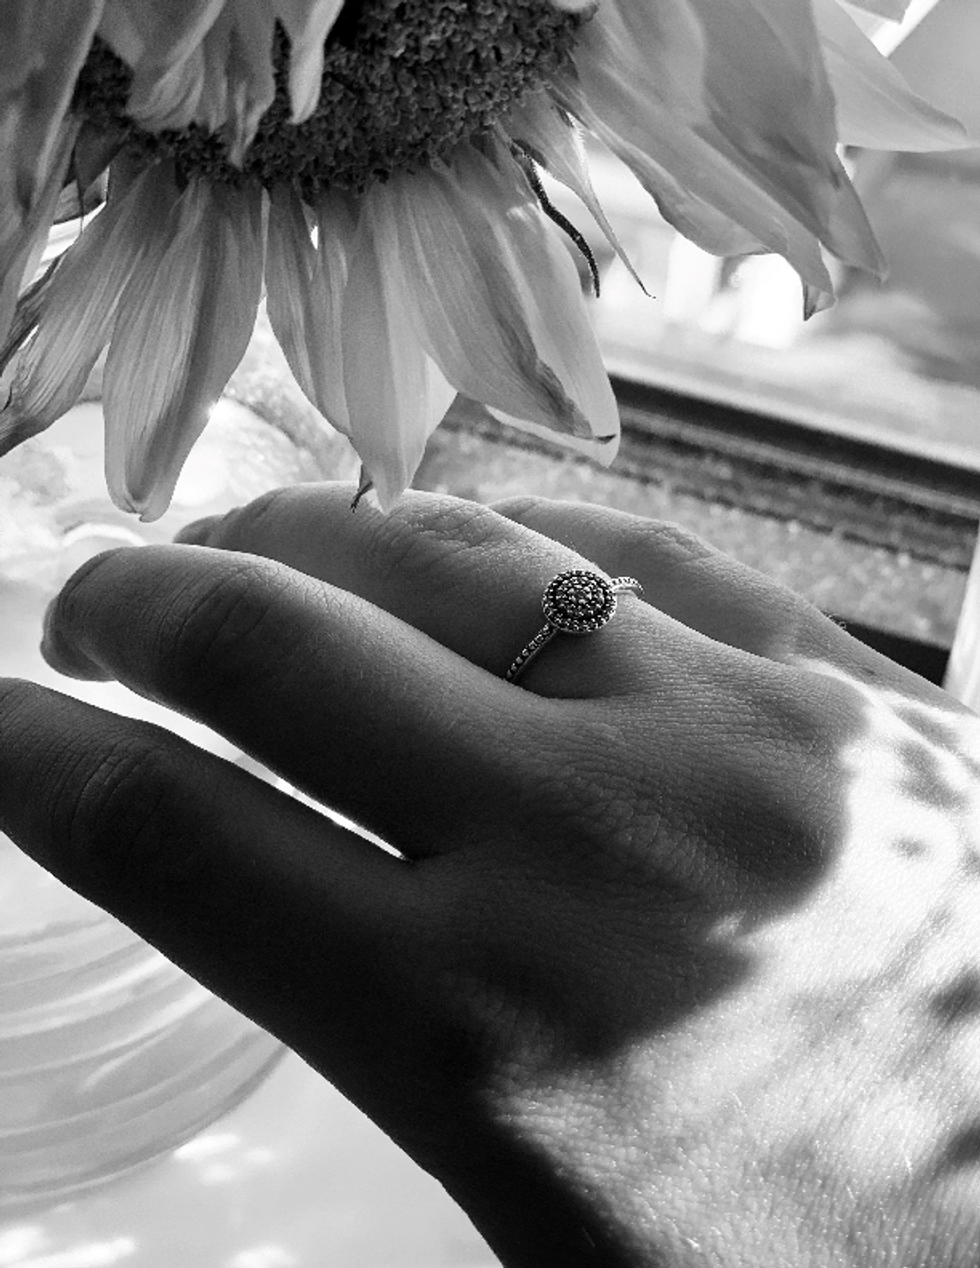 Why I Got A Purity Ring, Despite My Impure Past